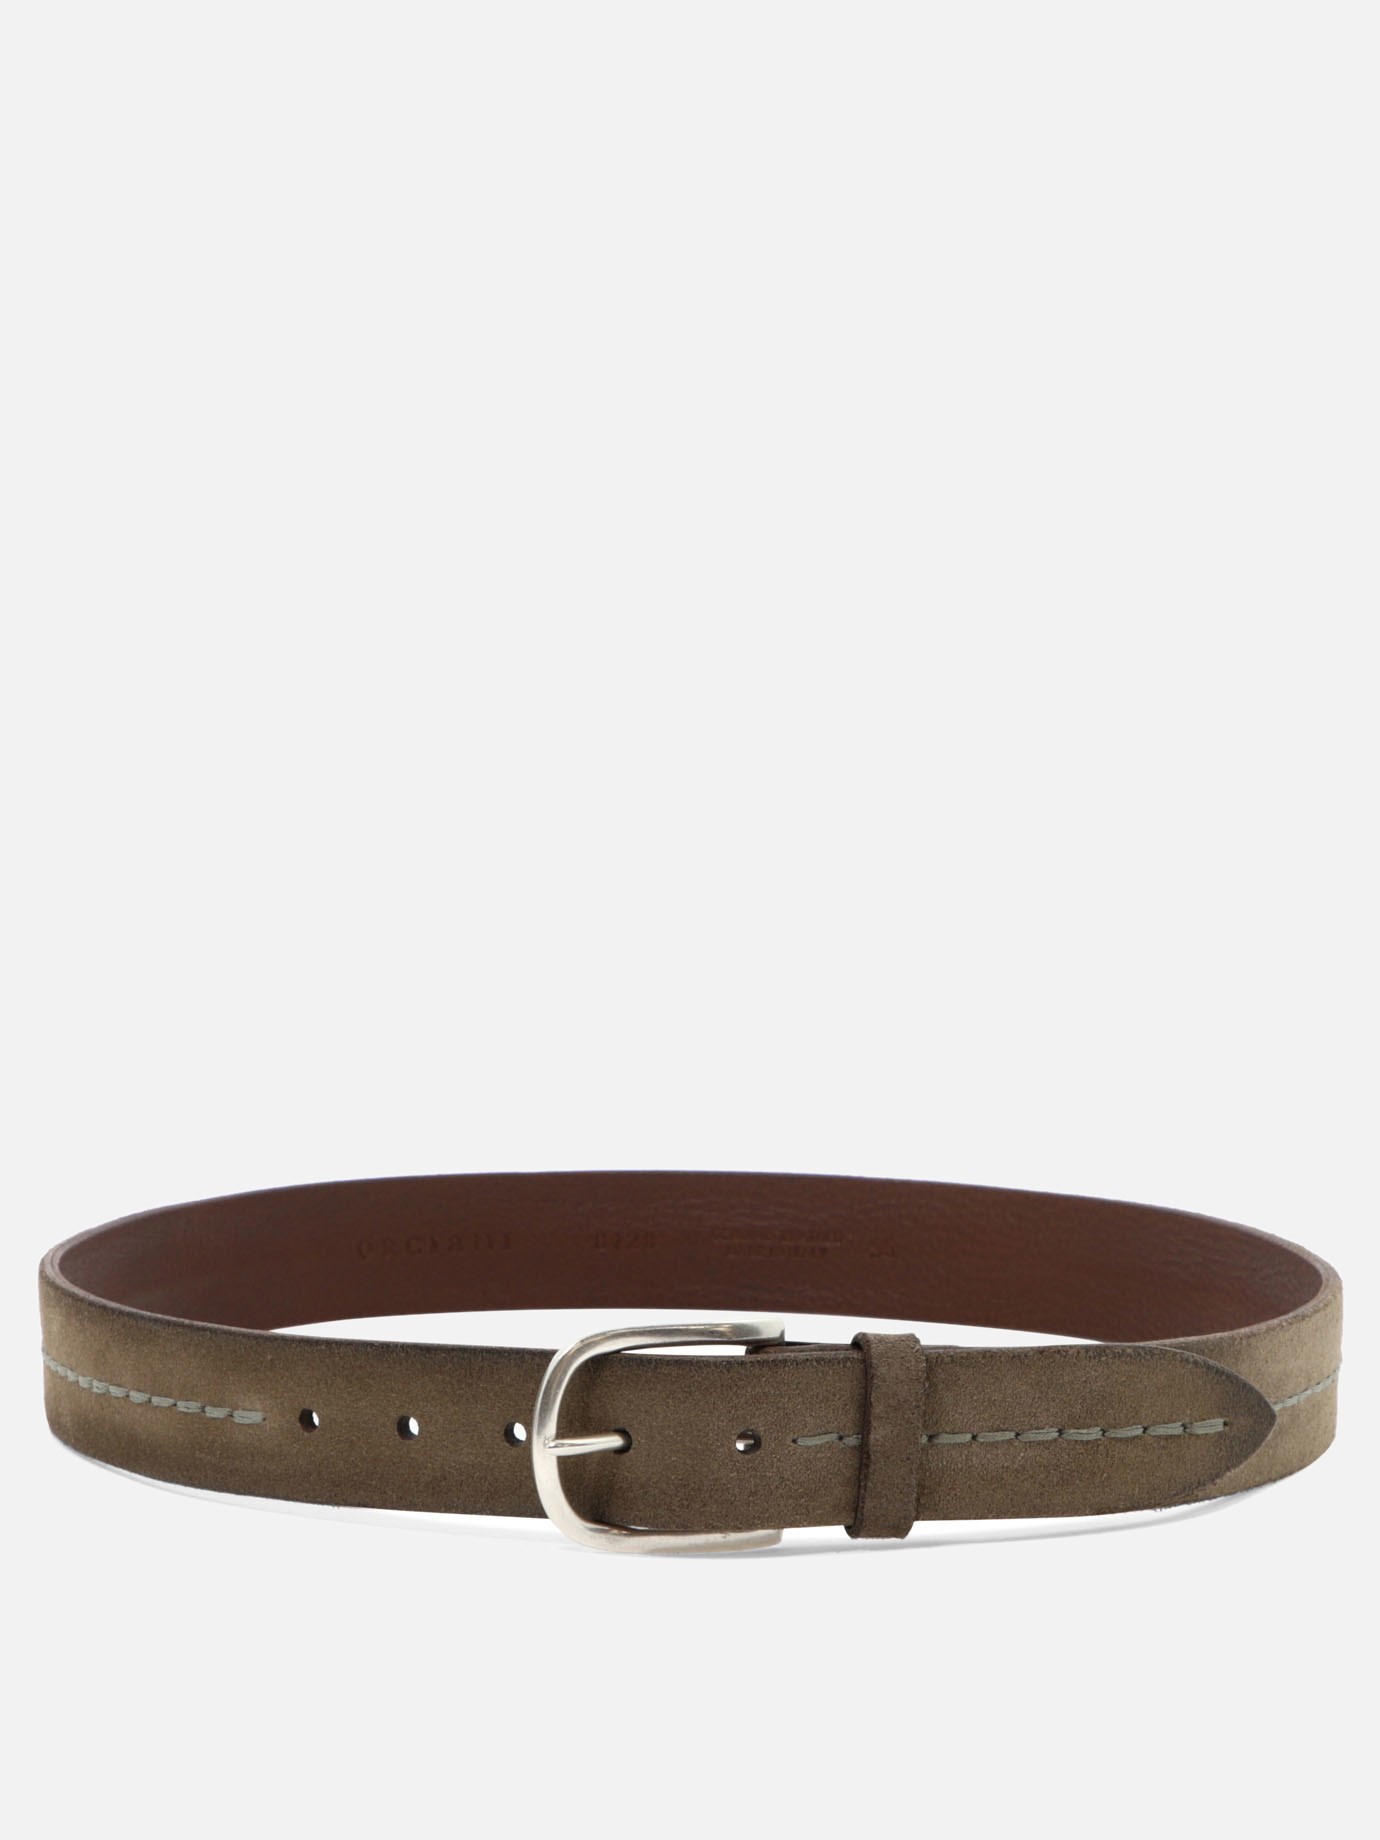 Suede beltby Orciani - 2